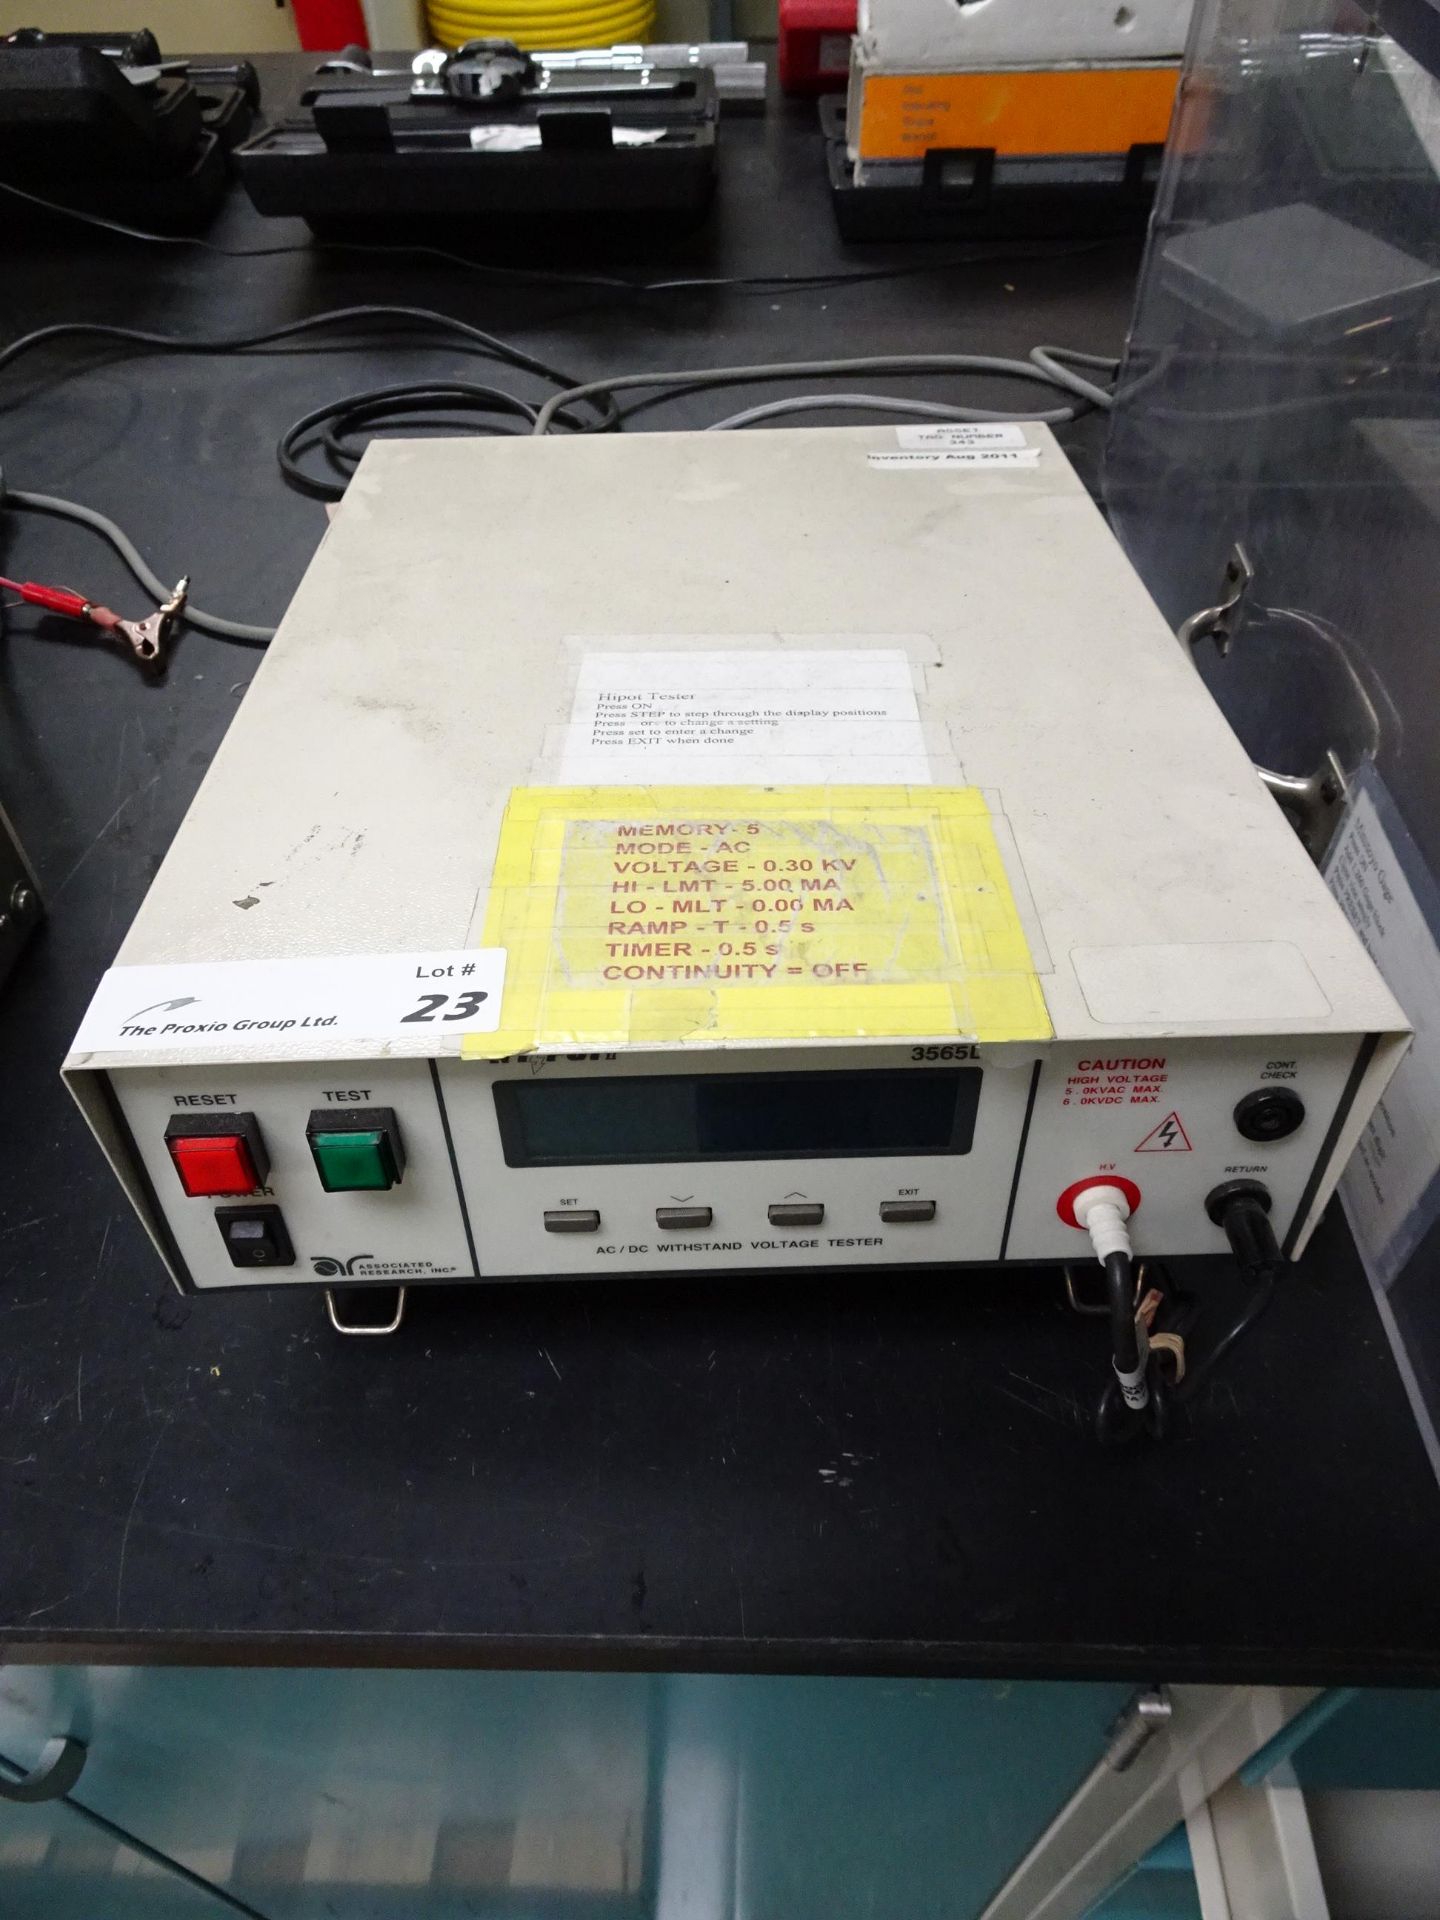 Associated Research Inc.Hipot 2 Series AC/DC Withstand Voltage Tester - Image 3 of 4